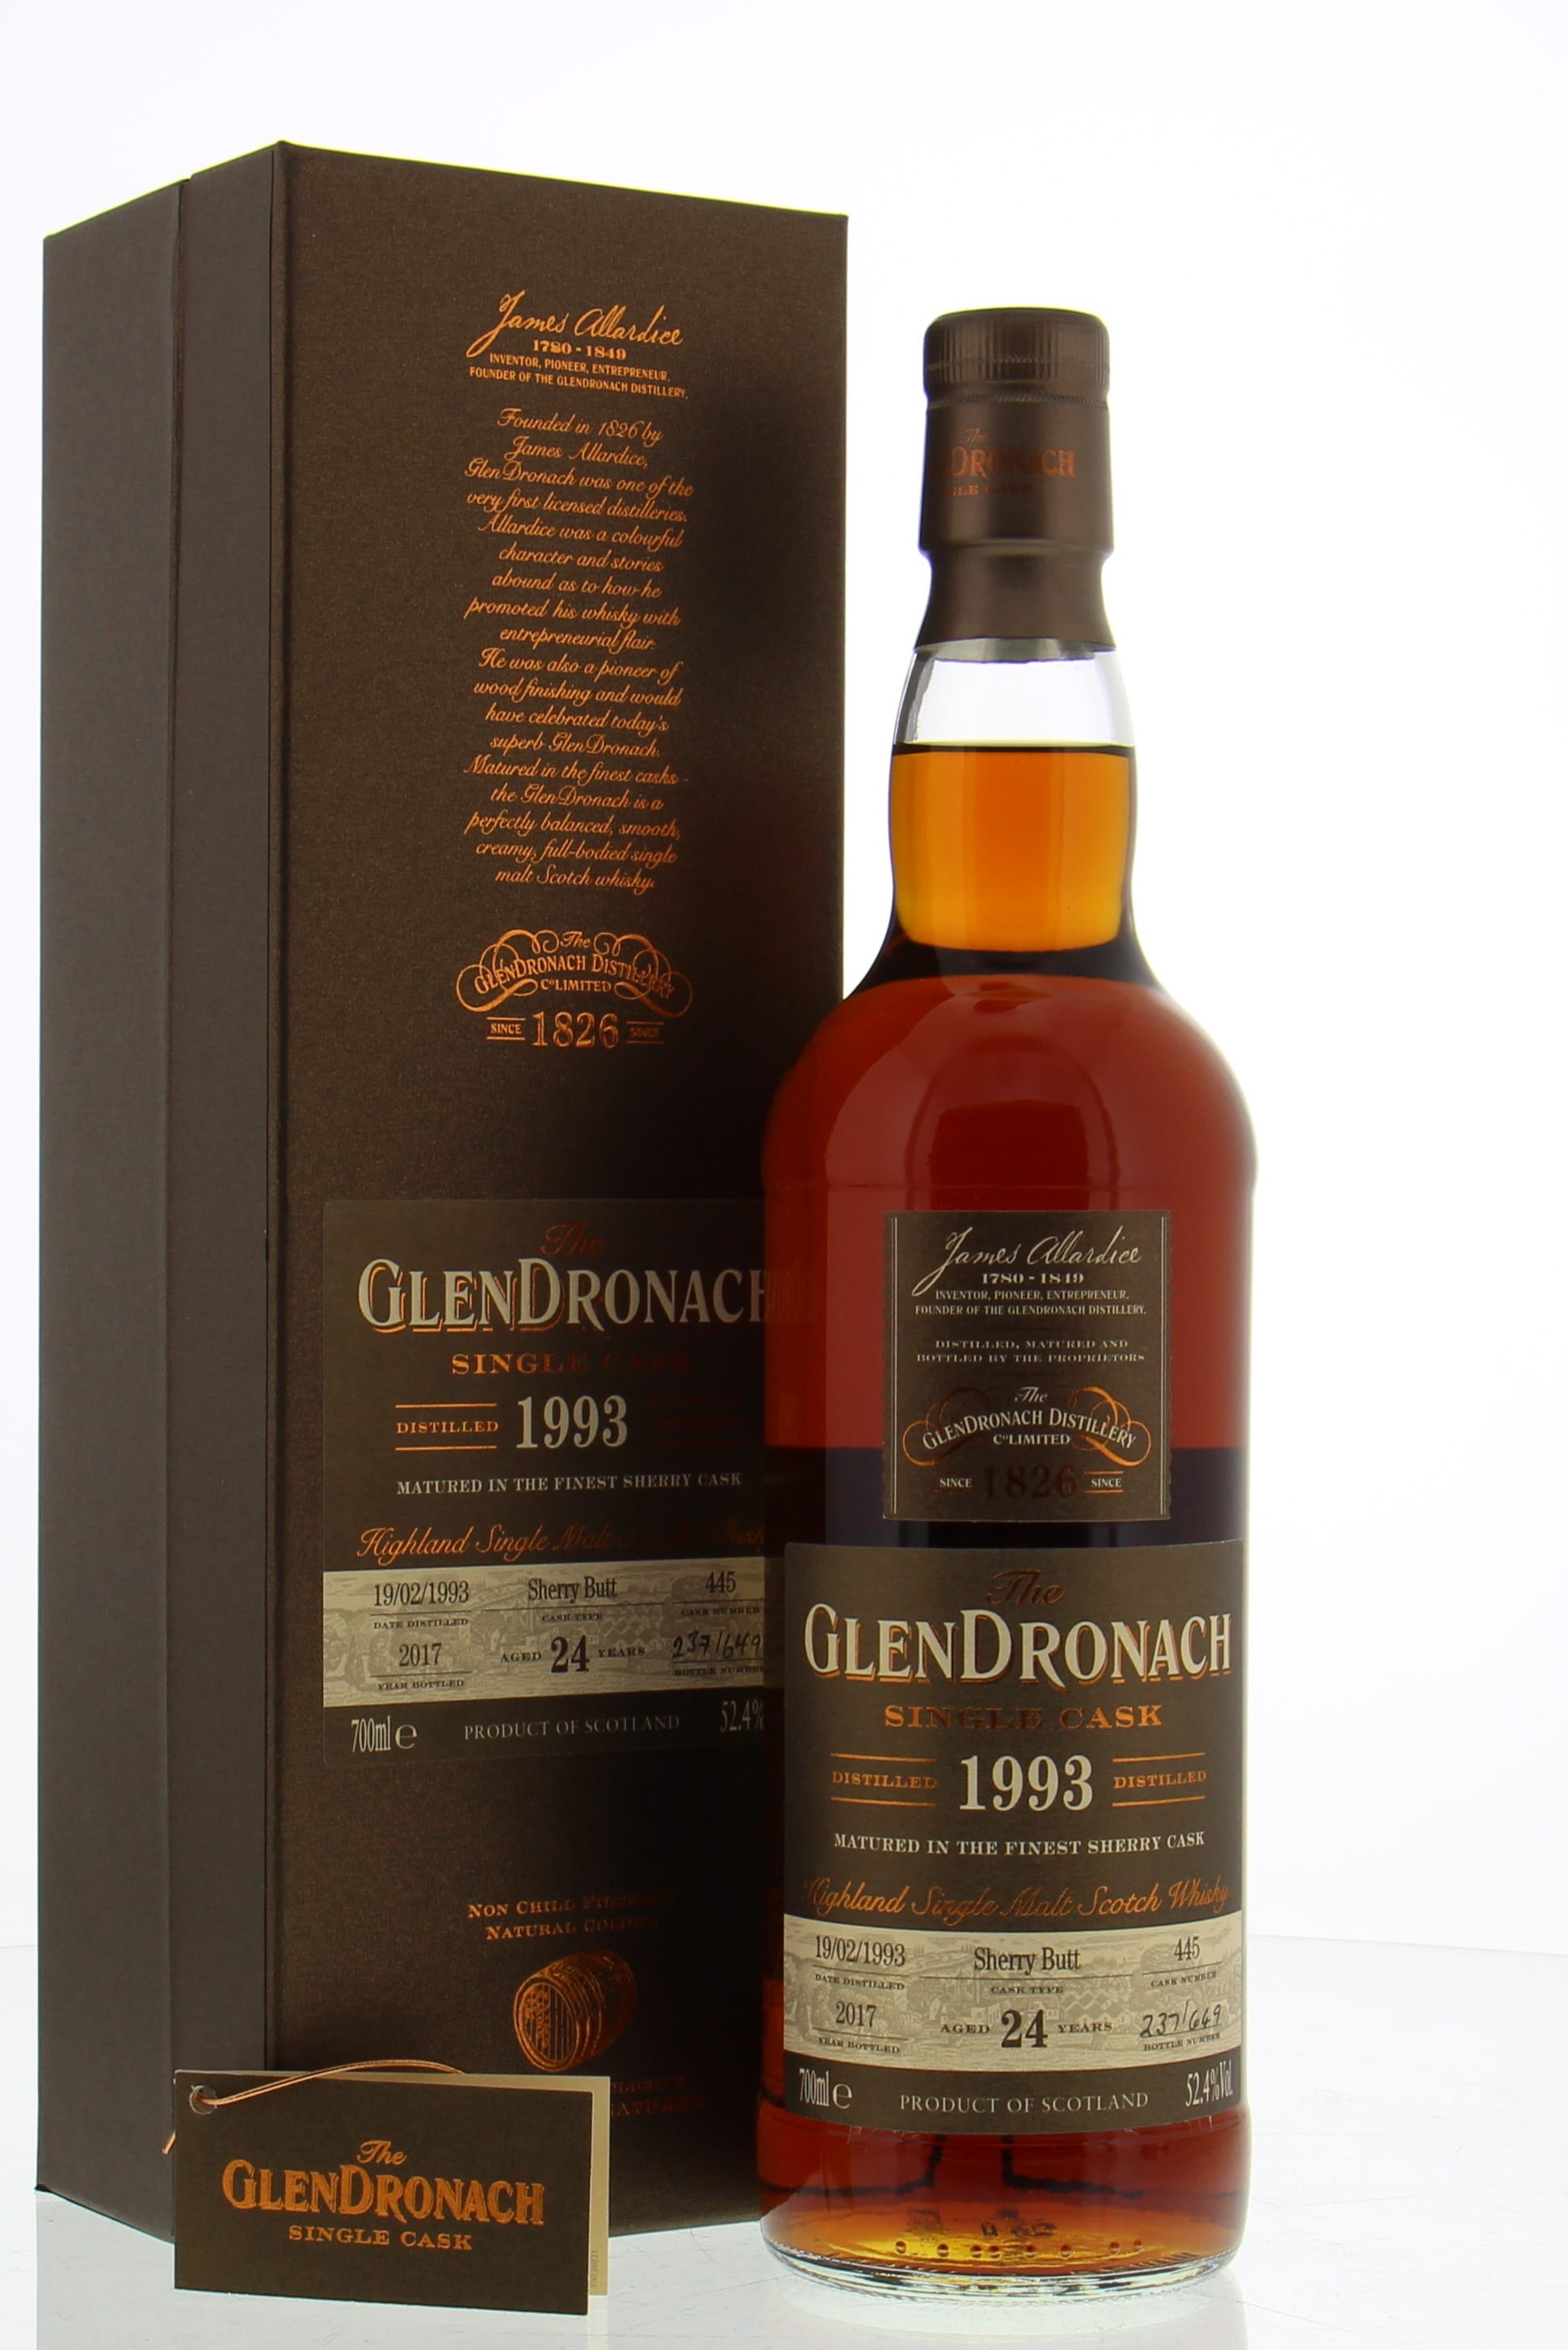 Glendronach - 24 Years Old Batch 16 Single Cask 445 52.4% 1993 In Original Container